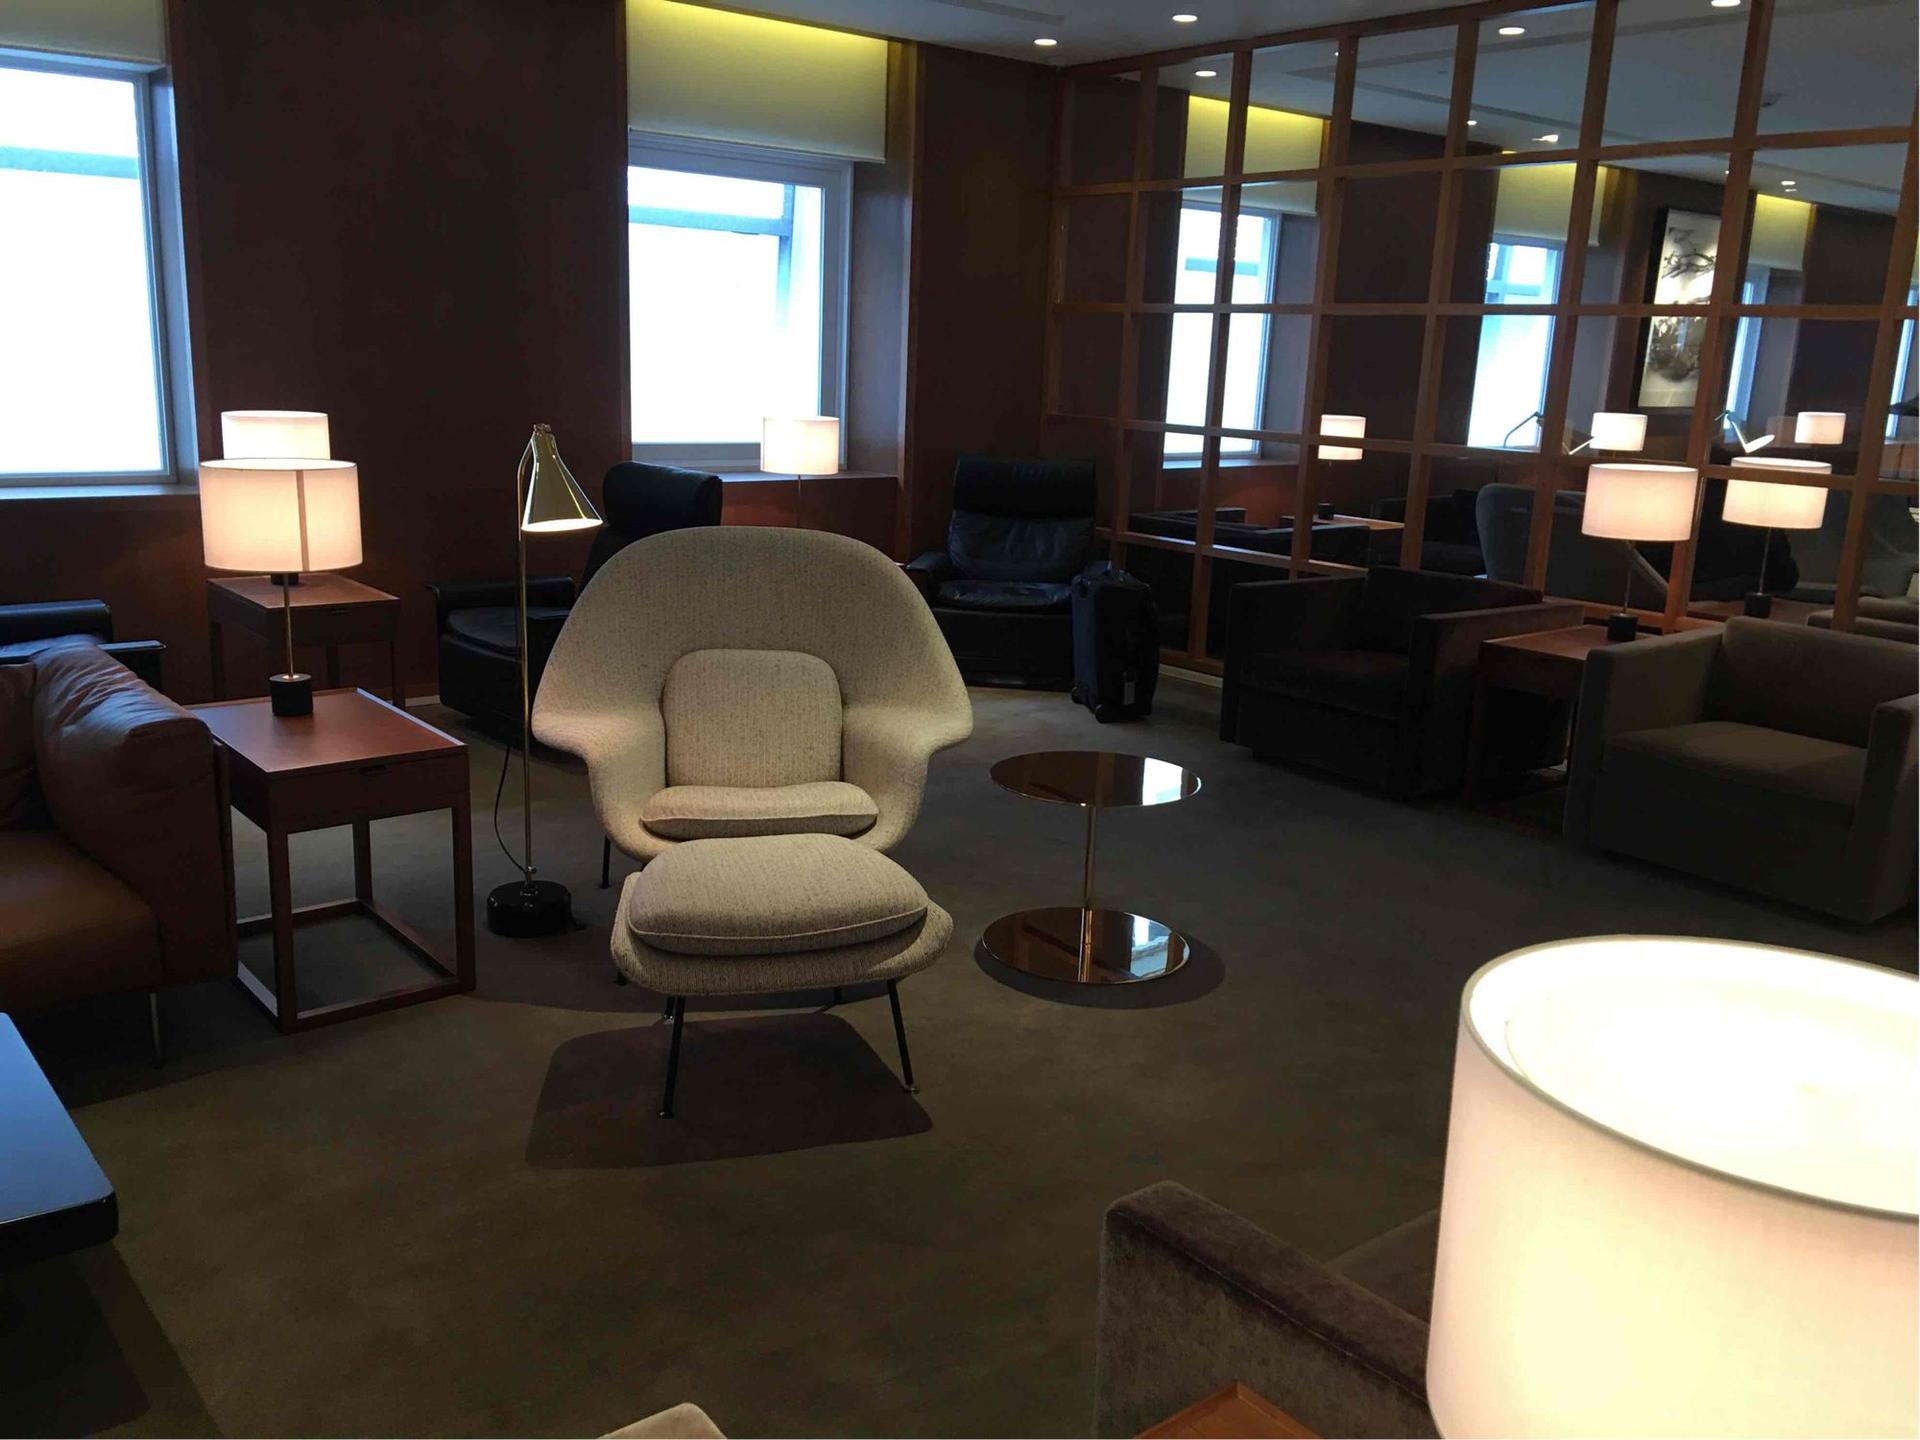 Cathay Pacific Lounge image 10 of 37